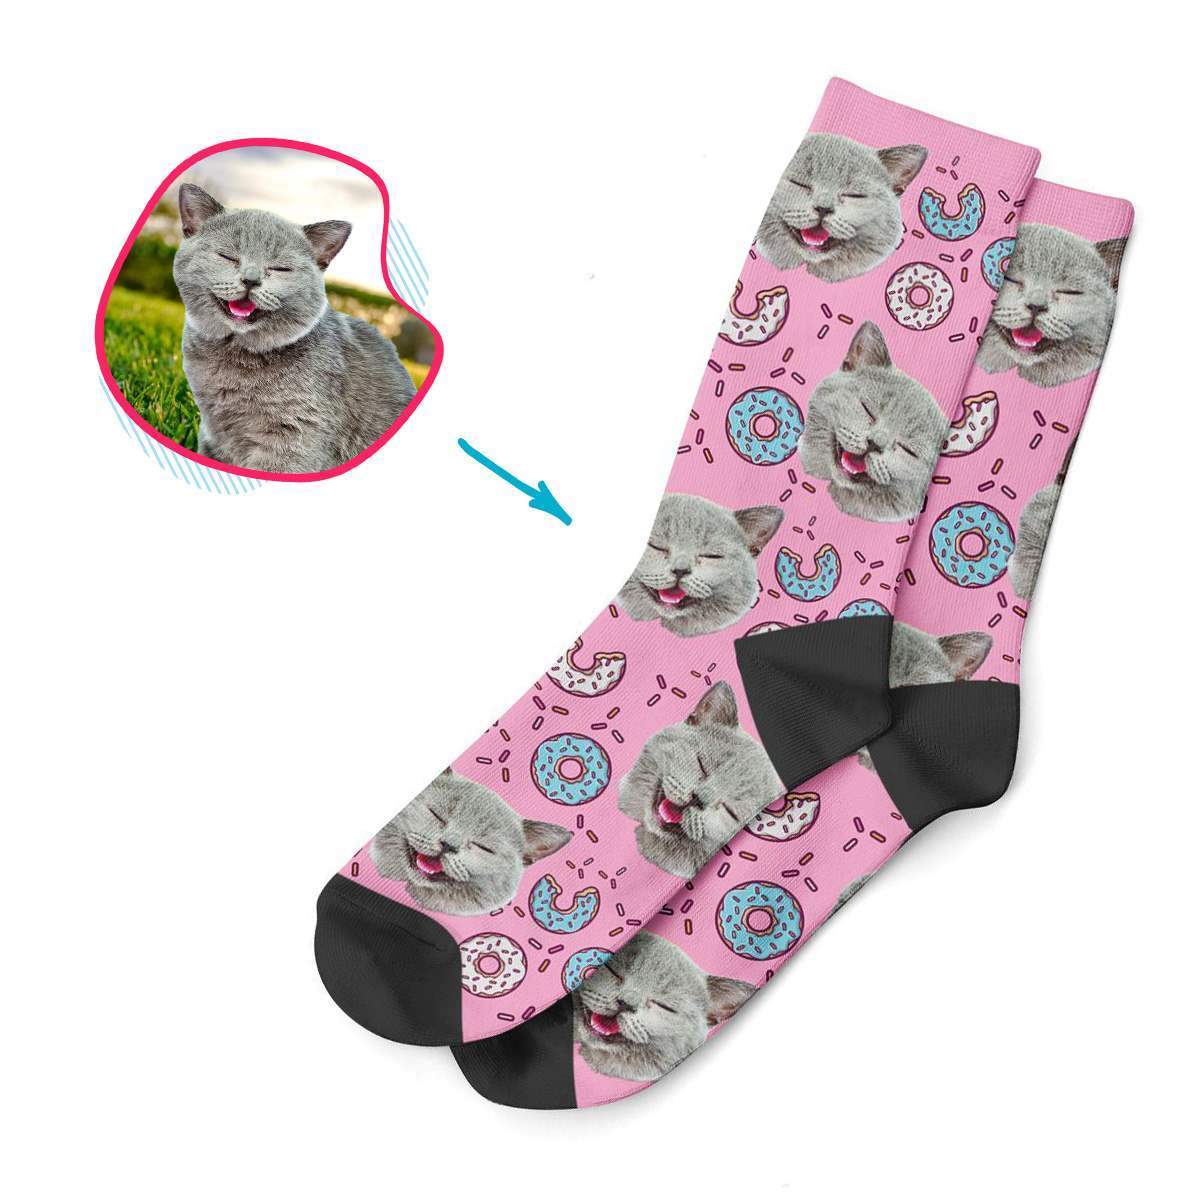 pink Donuts socks personalized with photo of face printed on them